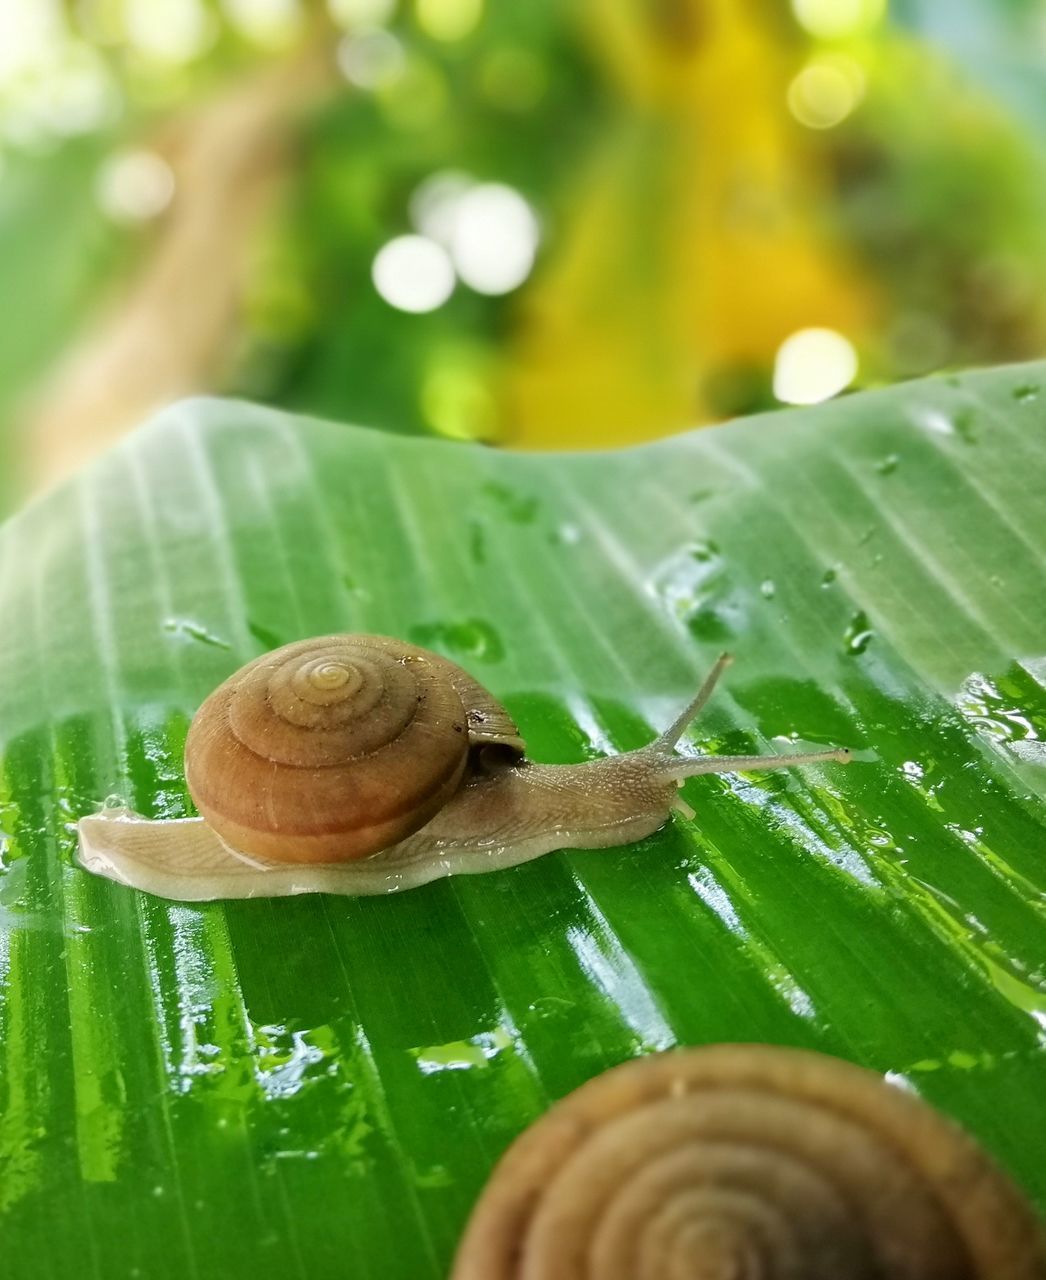 CLOSE-UP OF SNAIL ON A GREEN LEAF